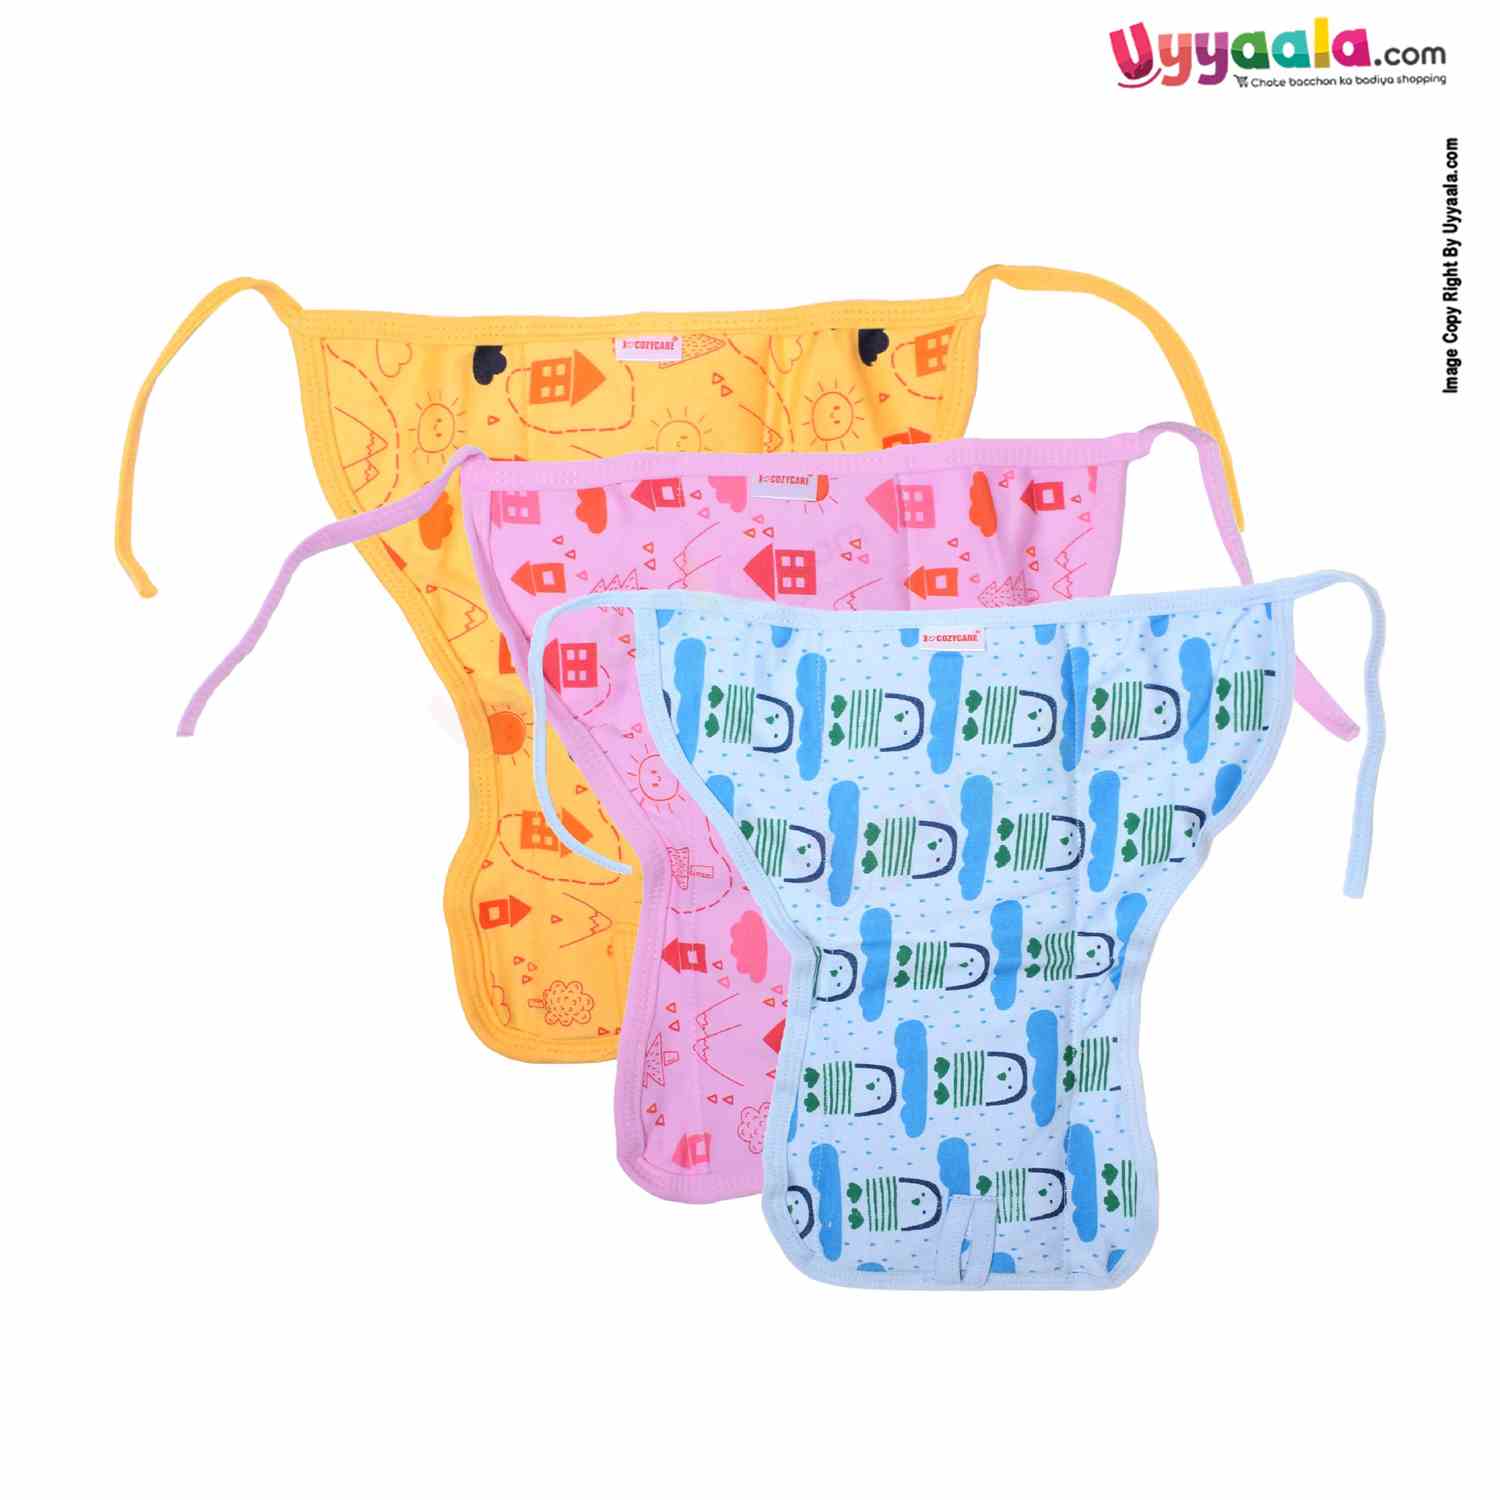 COZYCARE Washable Diapers Hosiery Tying Model House Print Yellow, Pink & Penguin Print Blue 3P Set (XS)